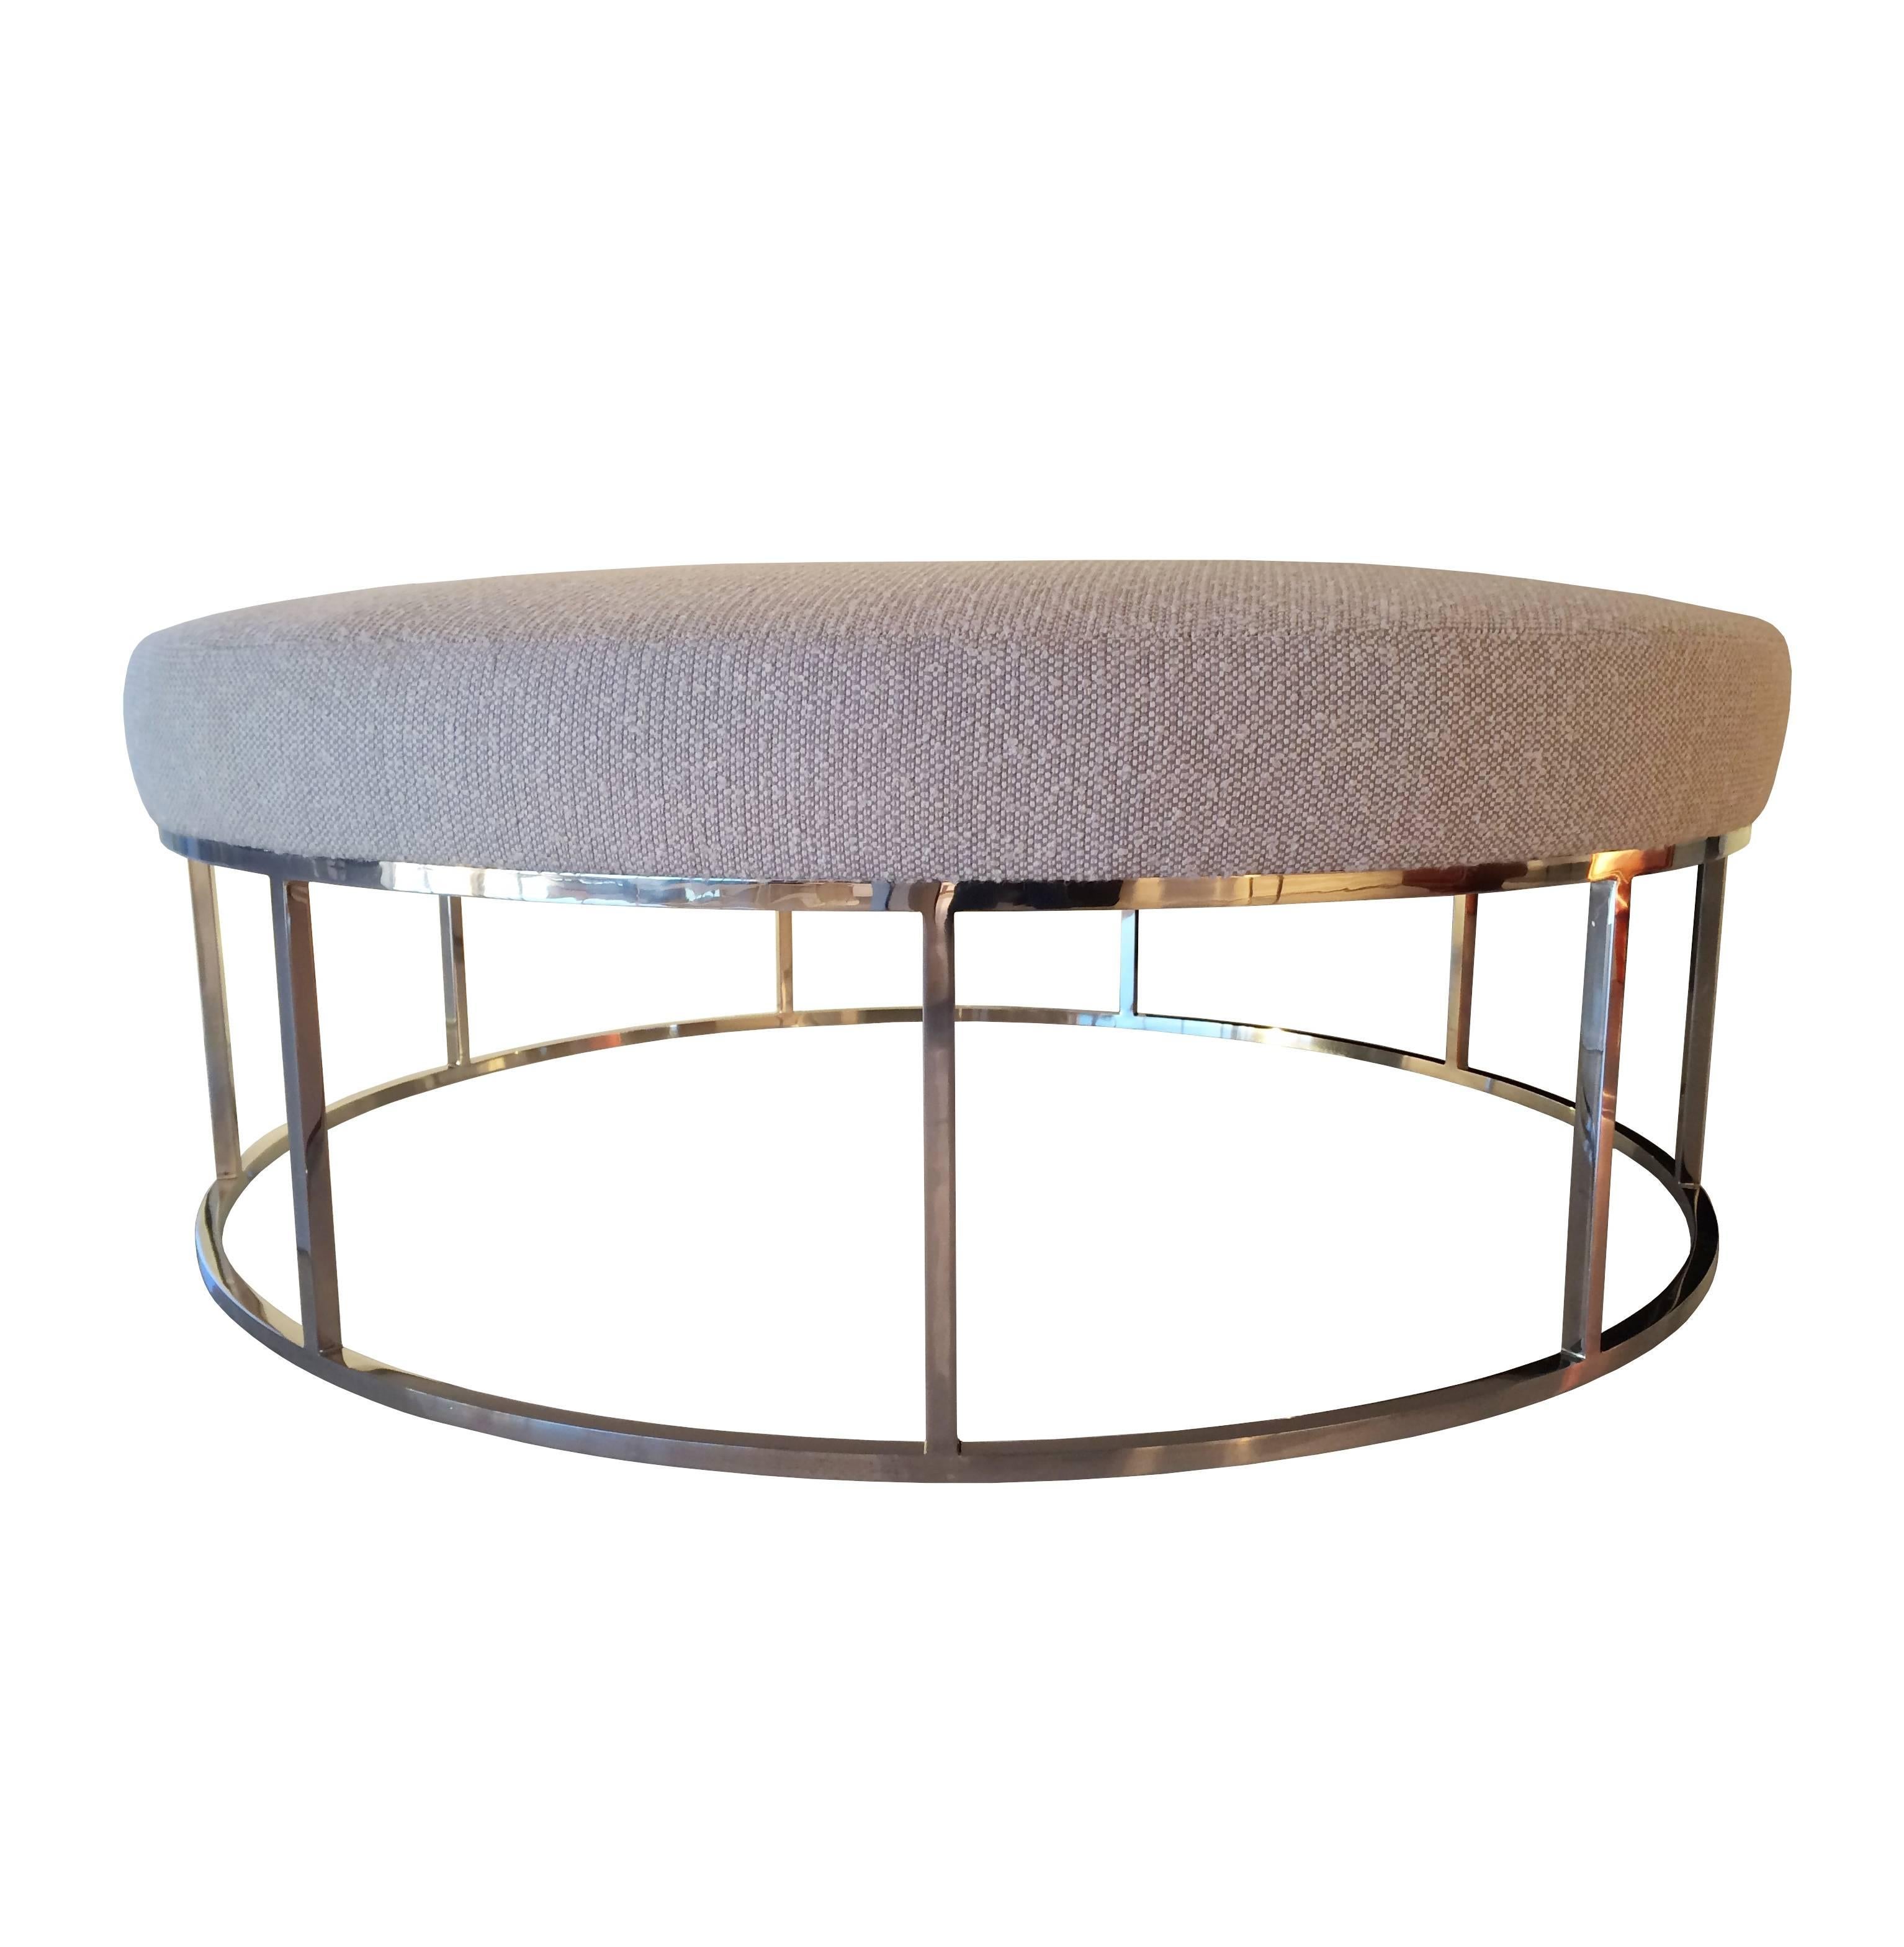 Stunning Custom Designed Round Ottoman with Stainless Steel Base